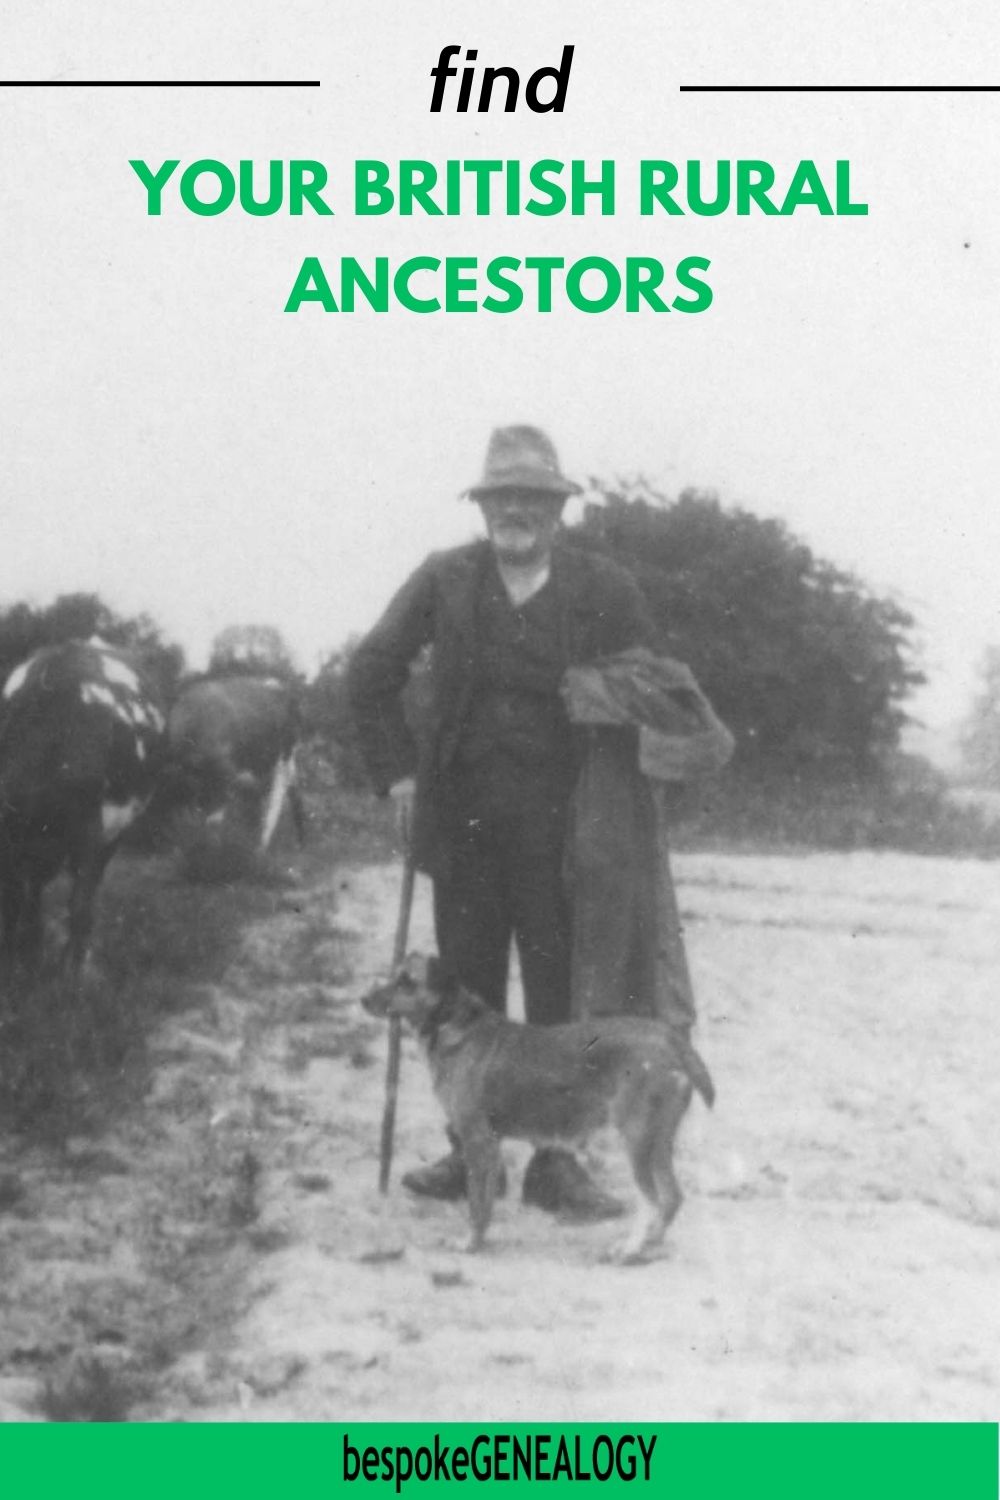 Find your British rural ancestors. Vintage photo of an old farmer standing on a rough road with his dog.